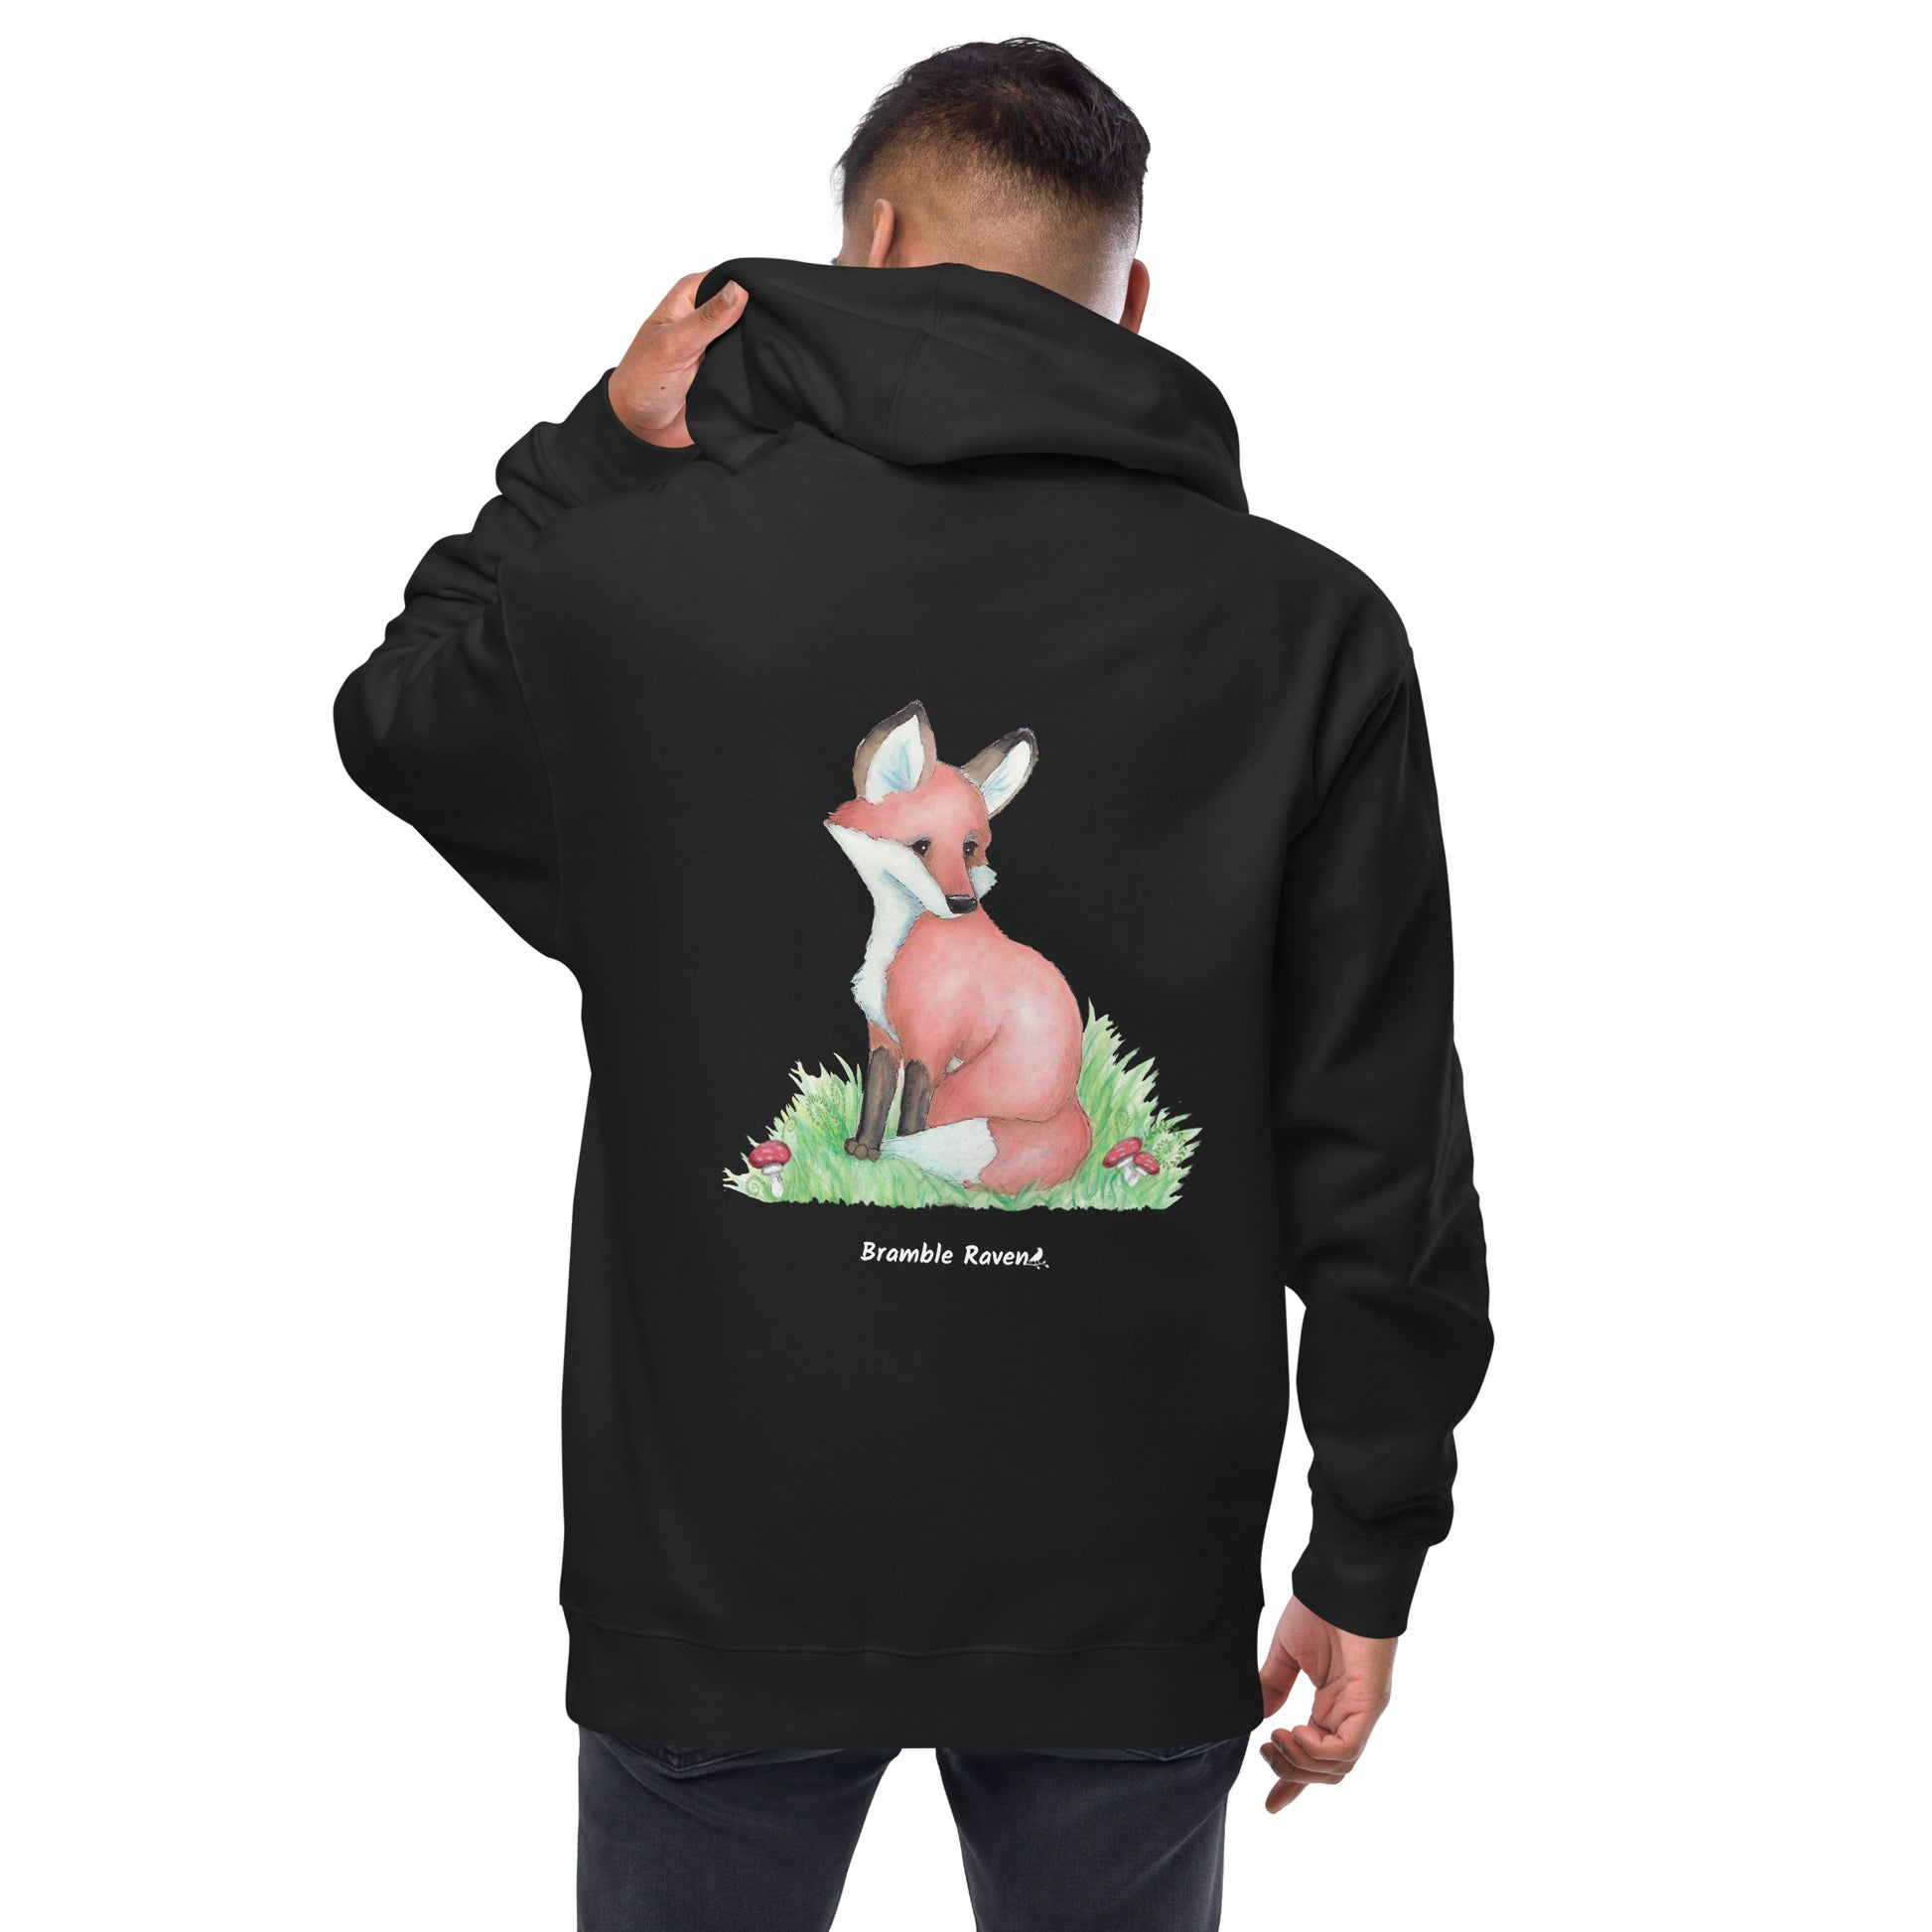 Black colored unisex fleece zip up hoodie. Back design features a watercolor fox in the grass with ferns and mushrooms. Has a jersey-lined hood, metal eyelets and zipper. Back view shown on male model.